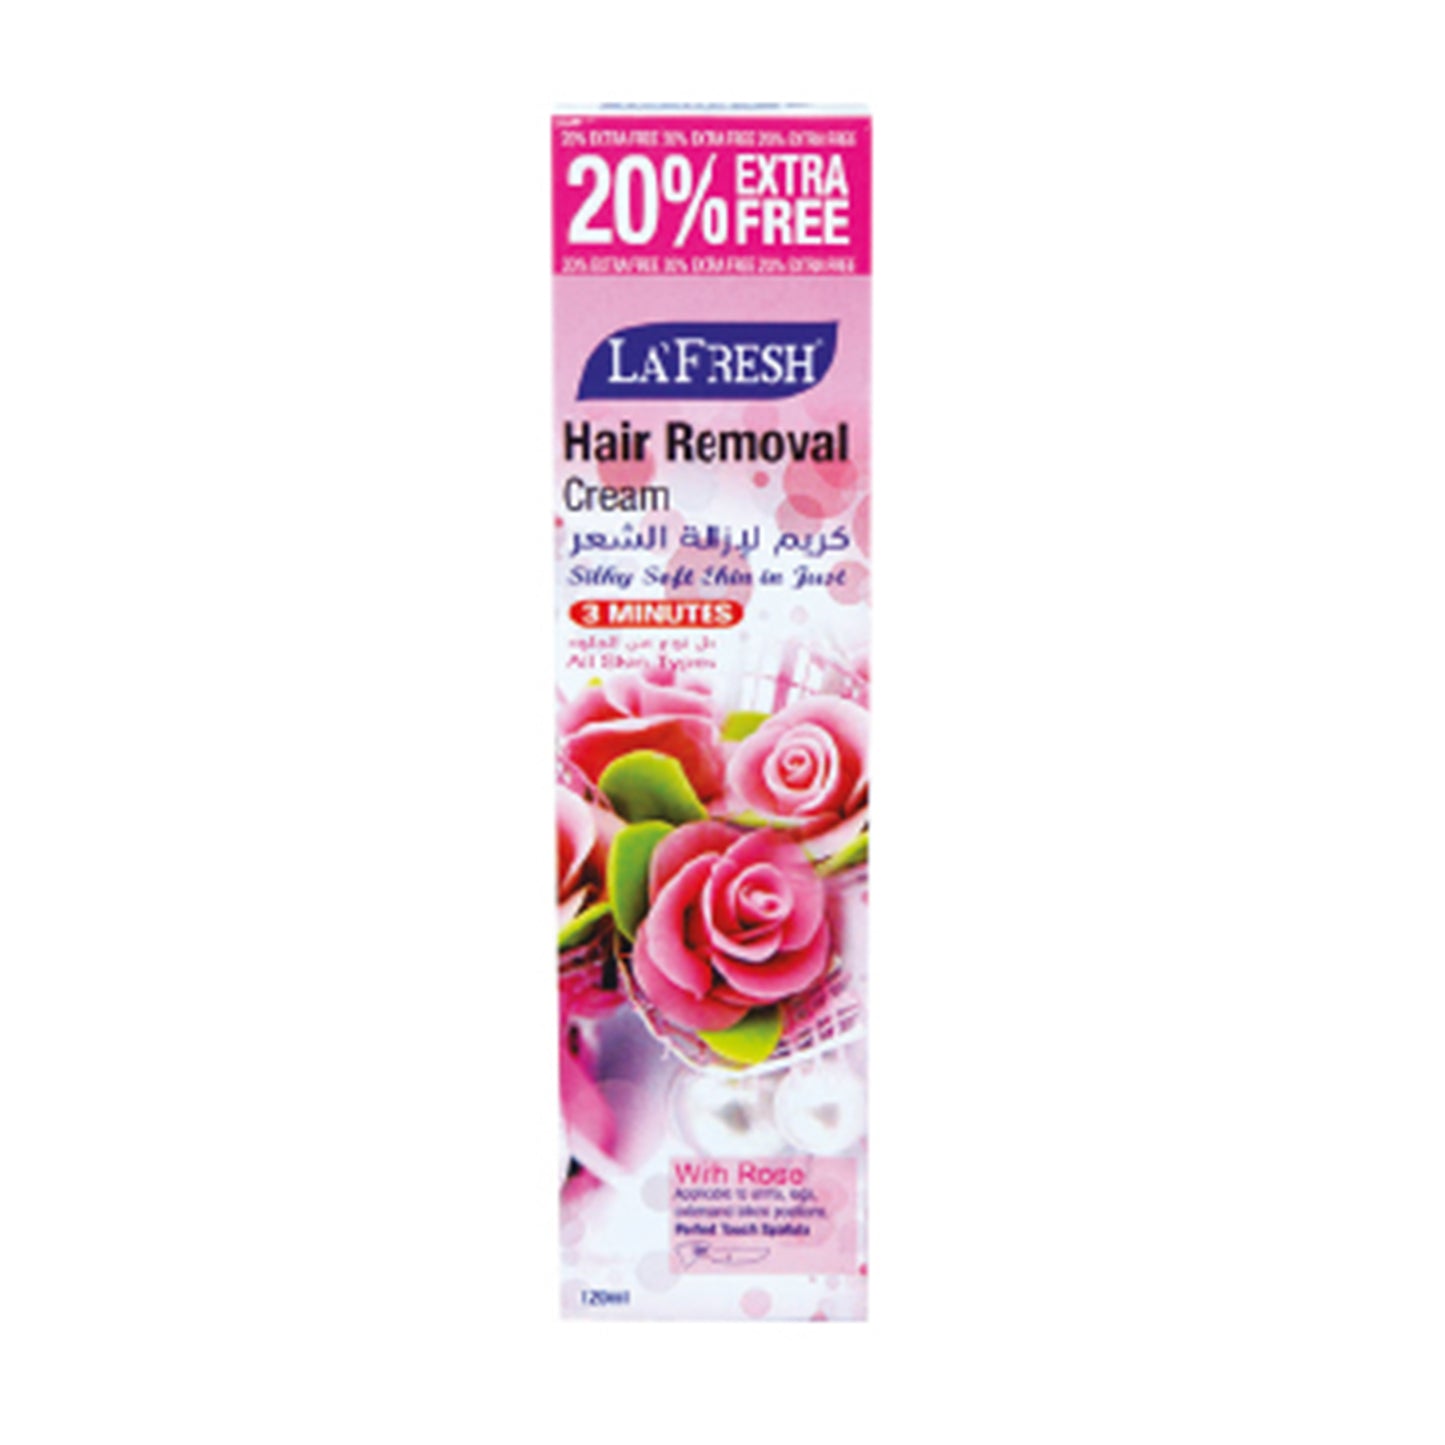 LA FRESH - HAIR REMOVAL CREAM WITH ROSE - 120ML